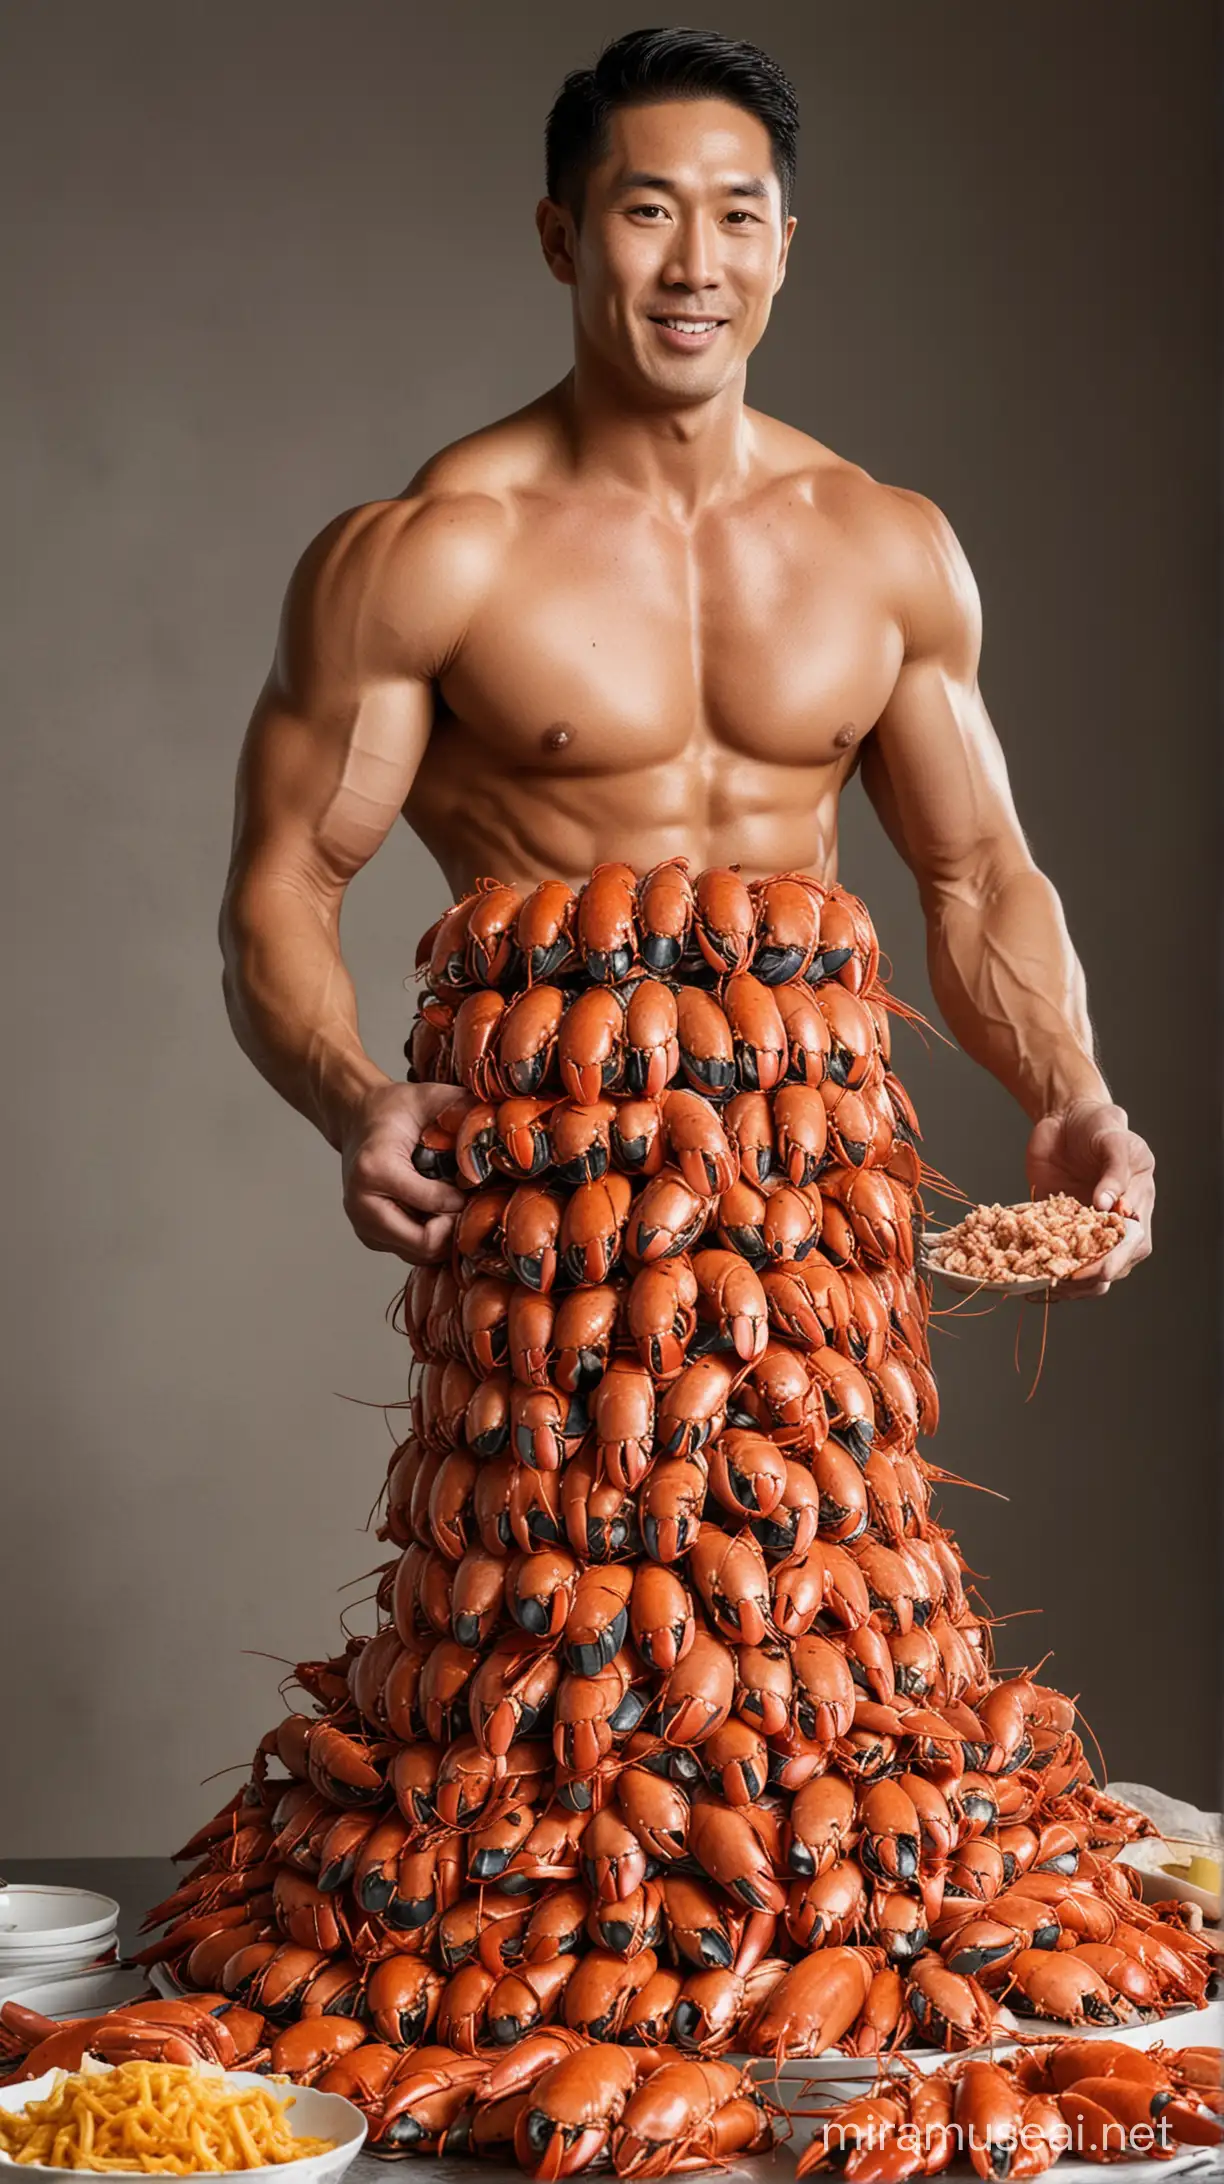 Muscle Asian Chef Shirtless Tower Lobster Display